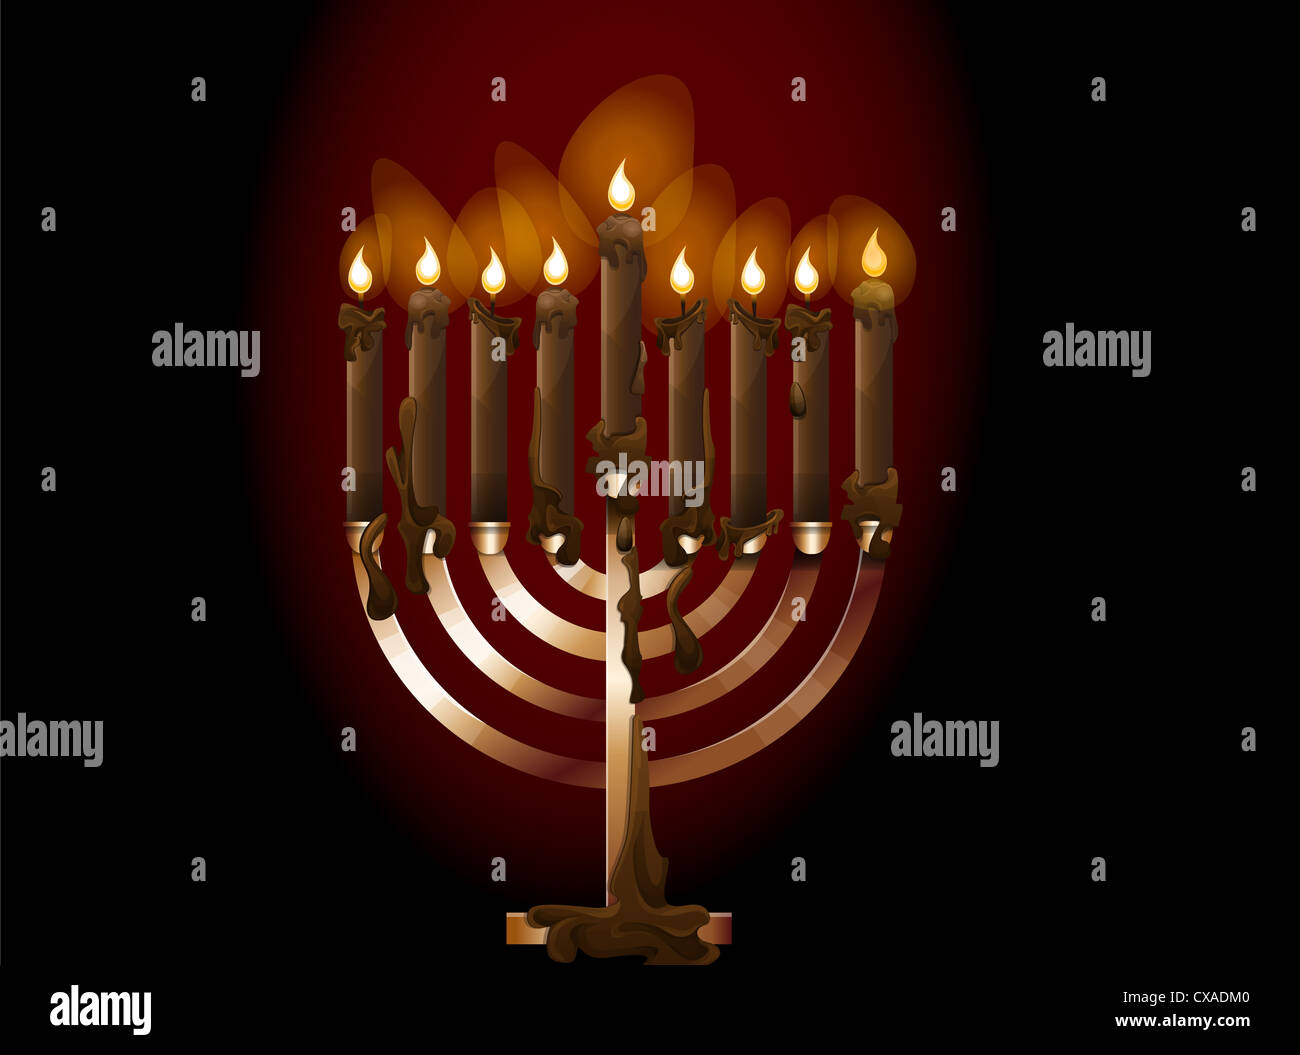 Menorah, a nine-branched candelabrum with lighted candles, vector illustration Stock Photo